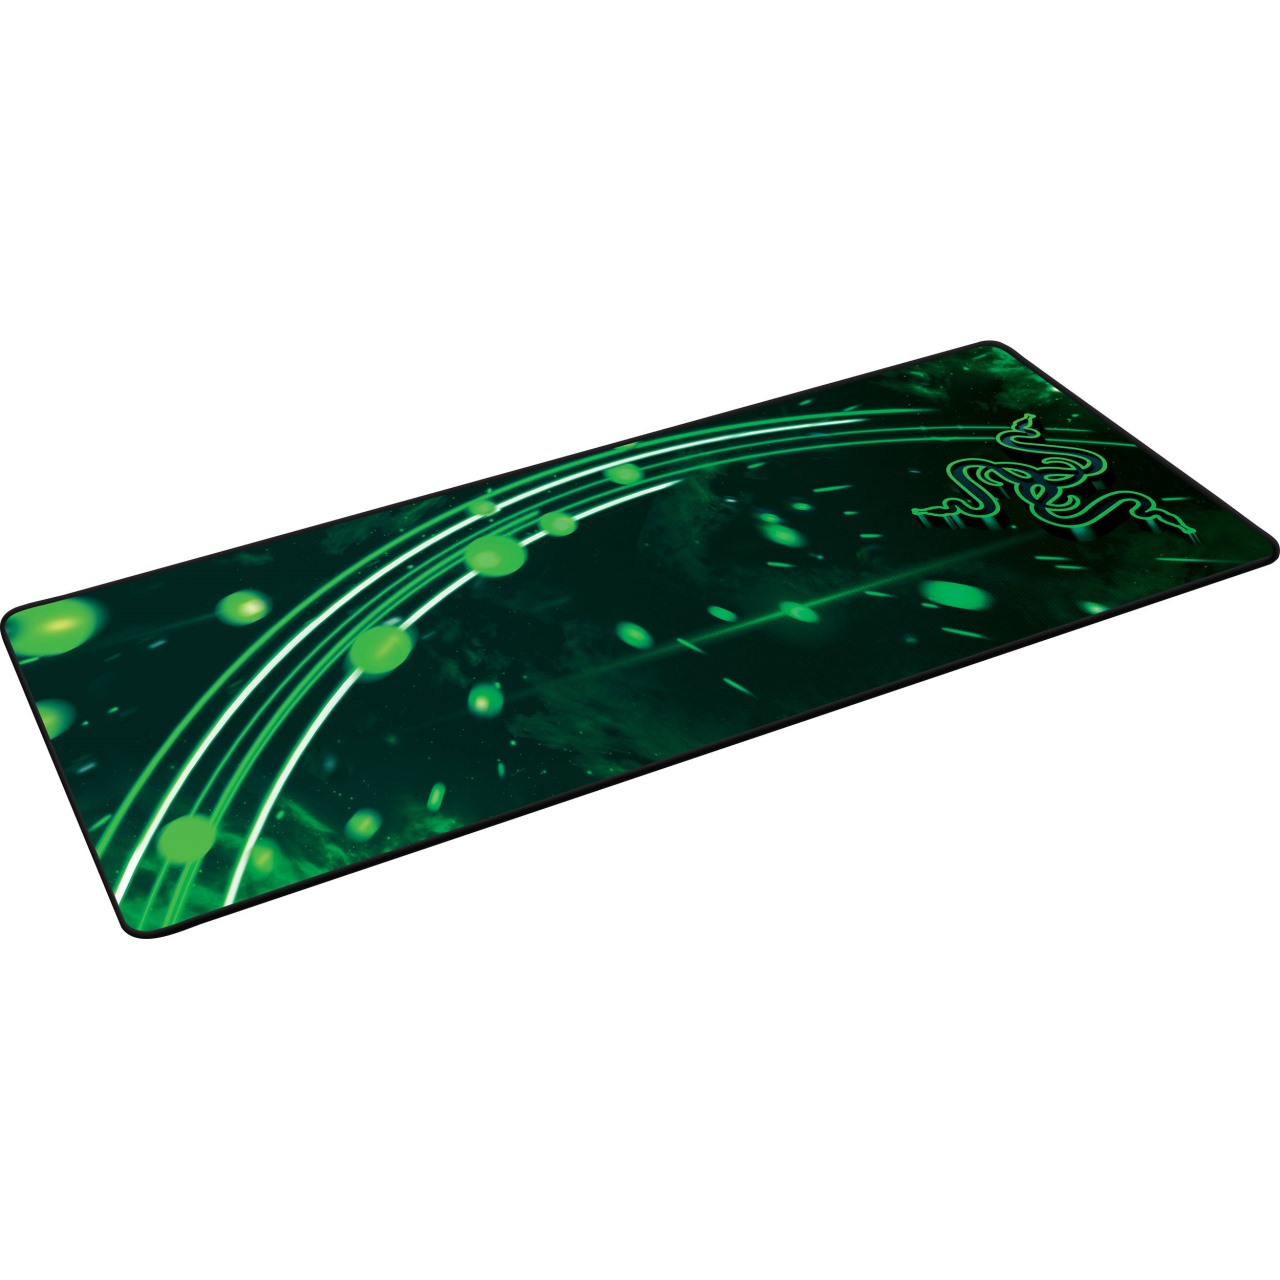 Razer Goliathus Speed Cosmic Edition - Soft Gaming Mouse Mat Extended - FRML Packaging